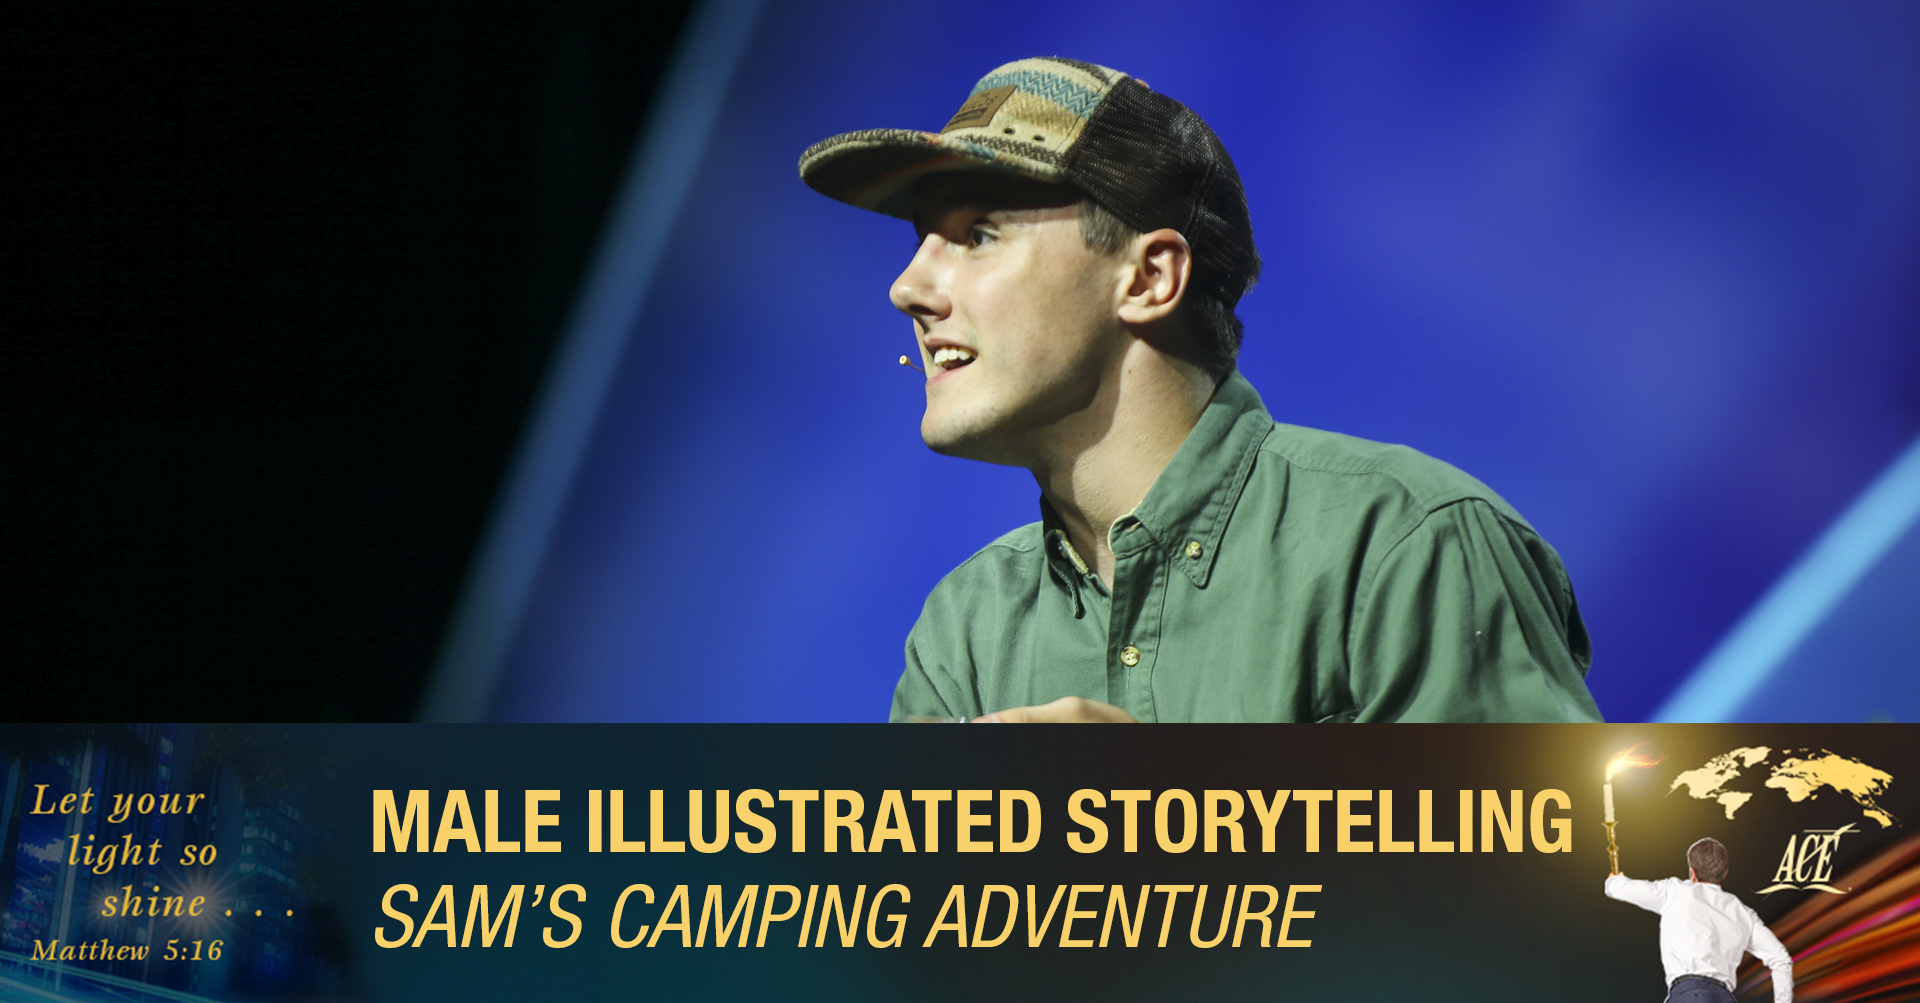 Male Illustrated Storytelling, "Sam's Camping Adventure" - ISC 2019